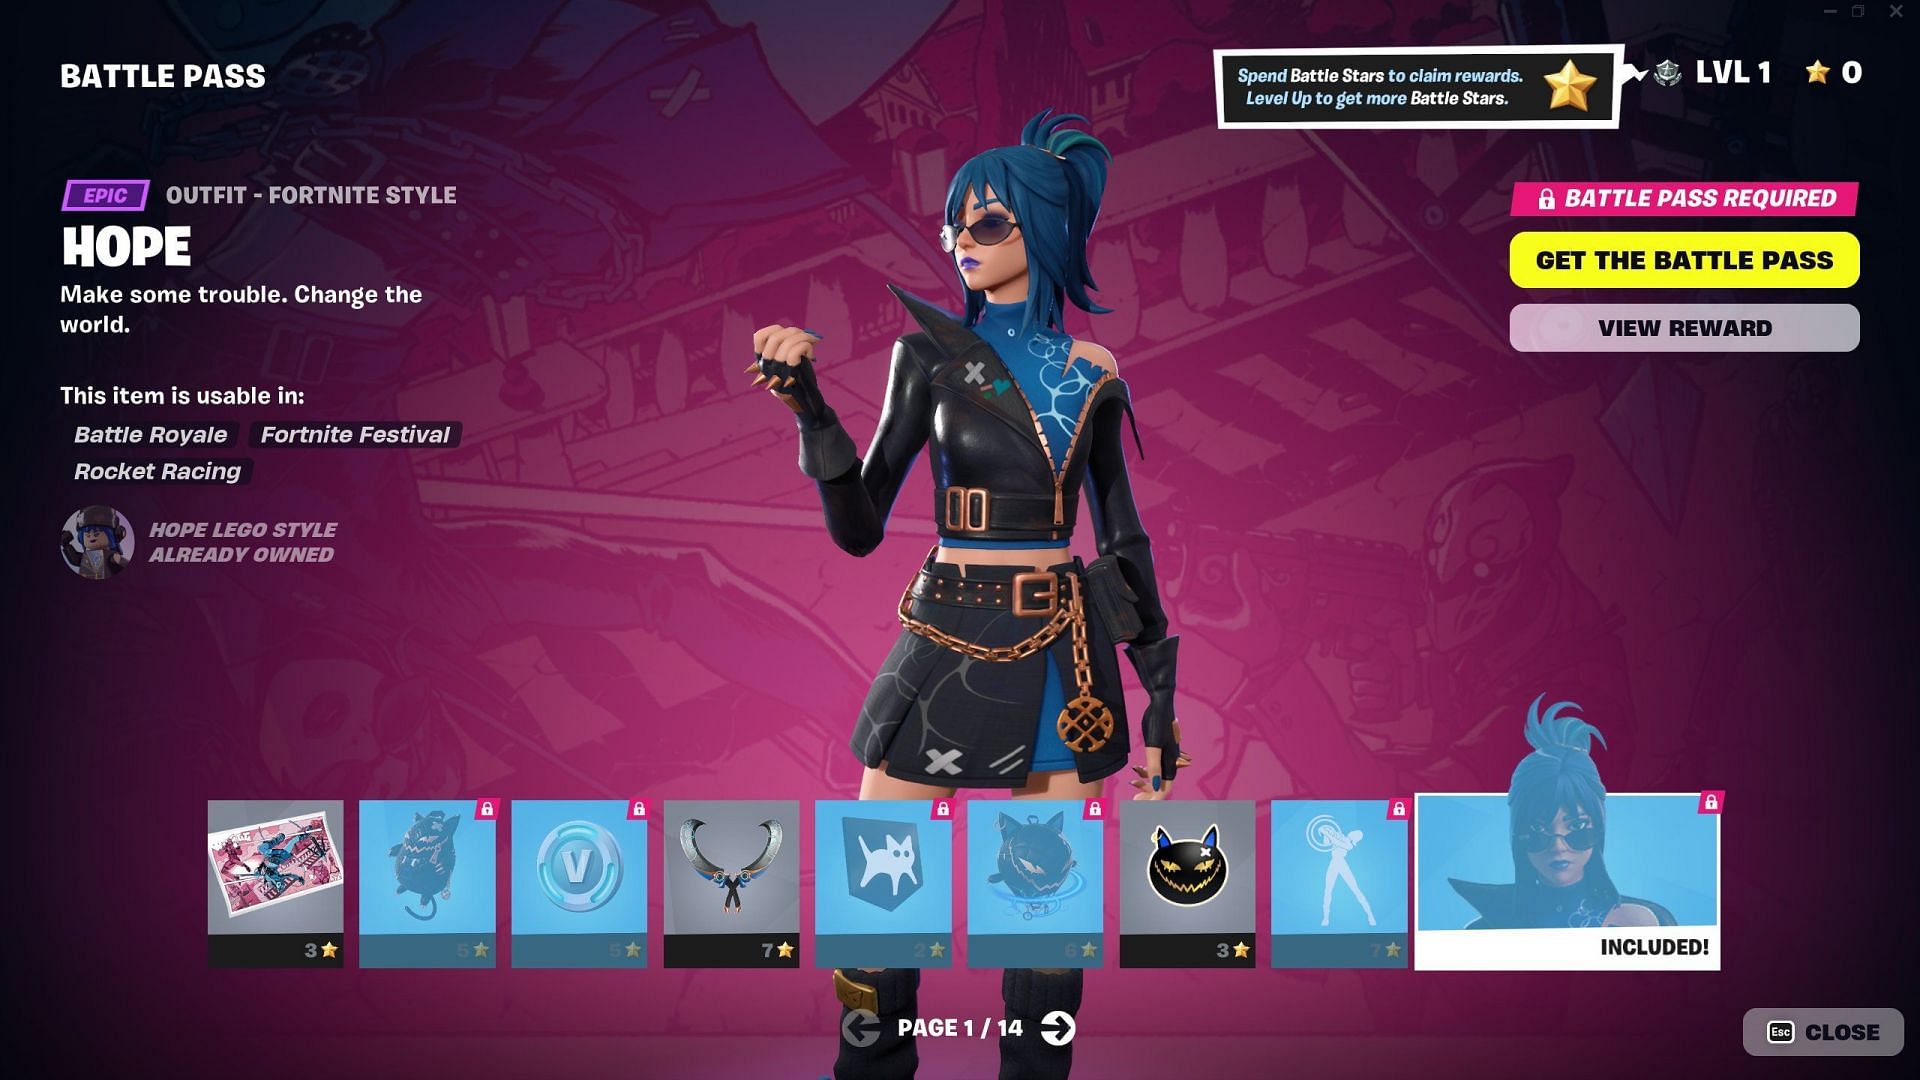 Page 1 of the Fortnite Battle Pass (Image via iFireMonkey/Twitter)